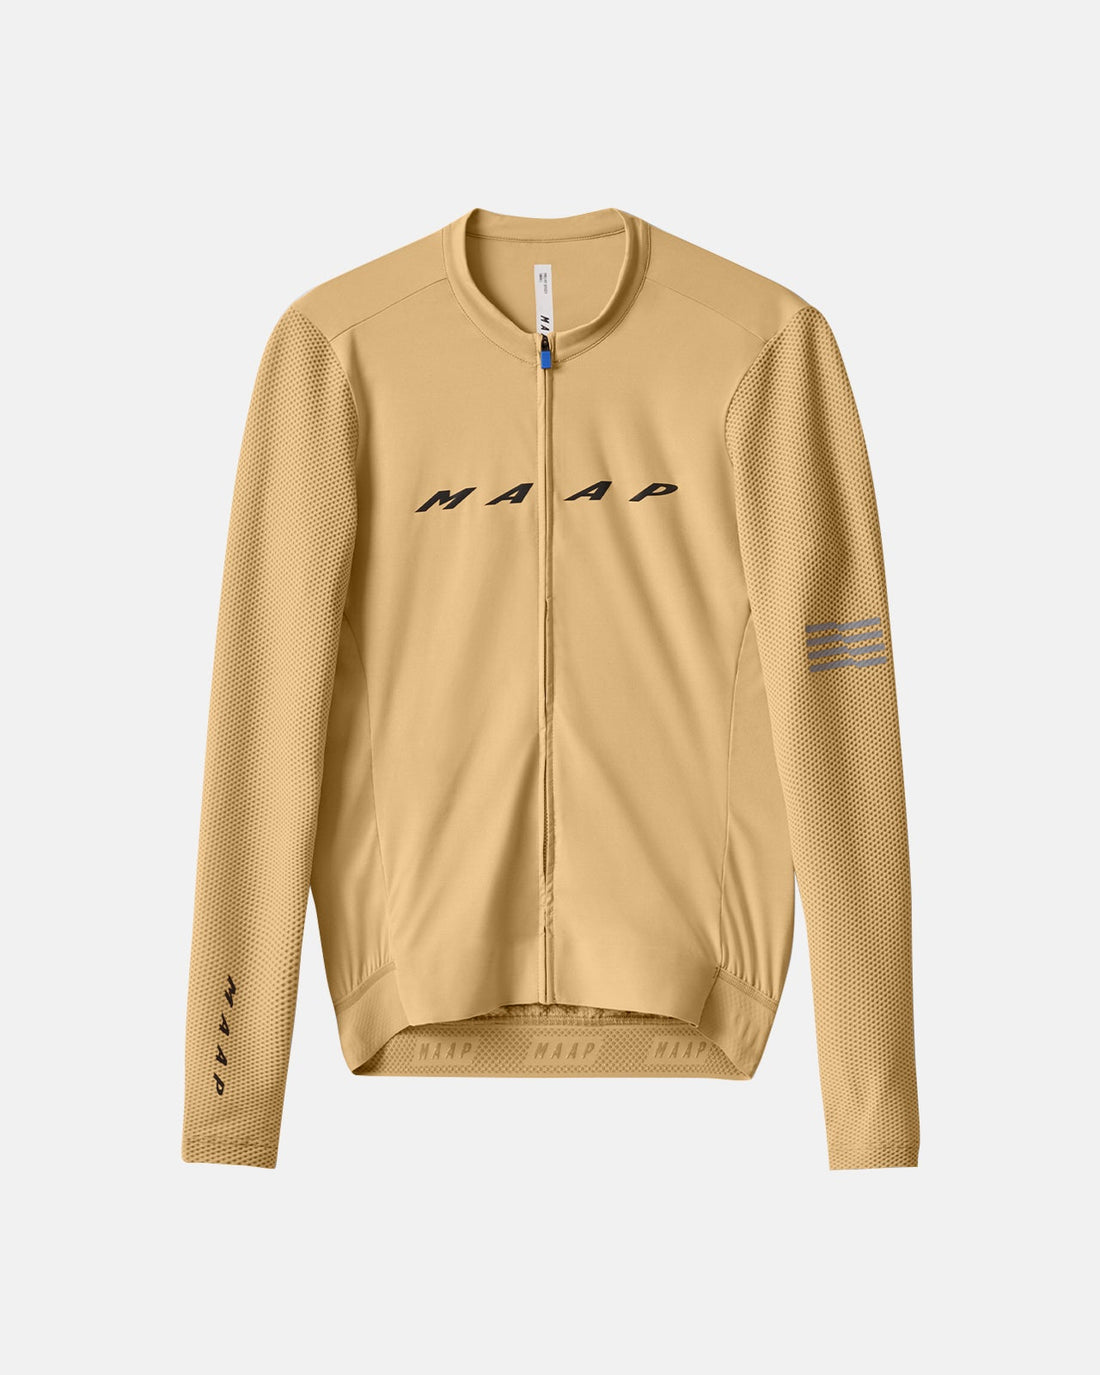 Evade Pro Base LS Jersey 2.0 - Fawn - MAAP